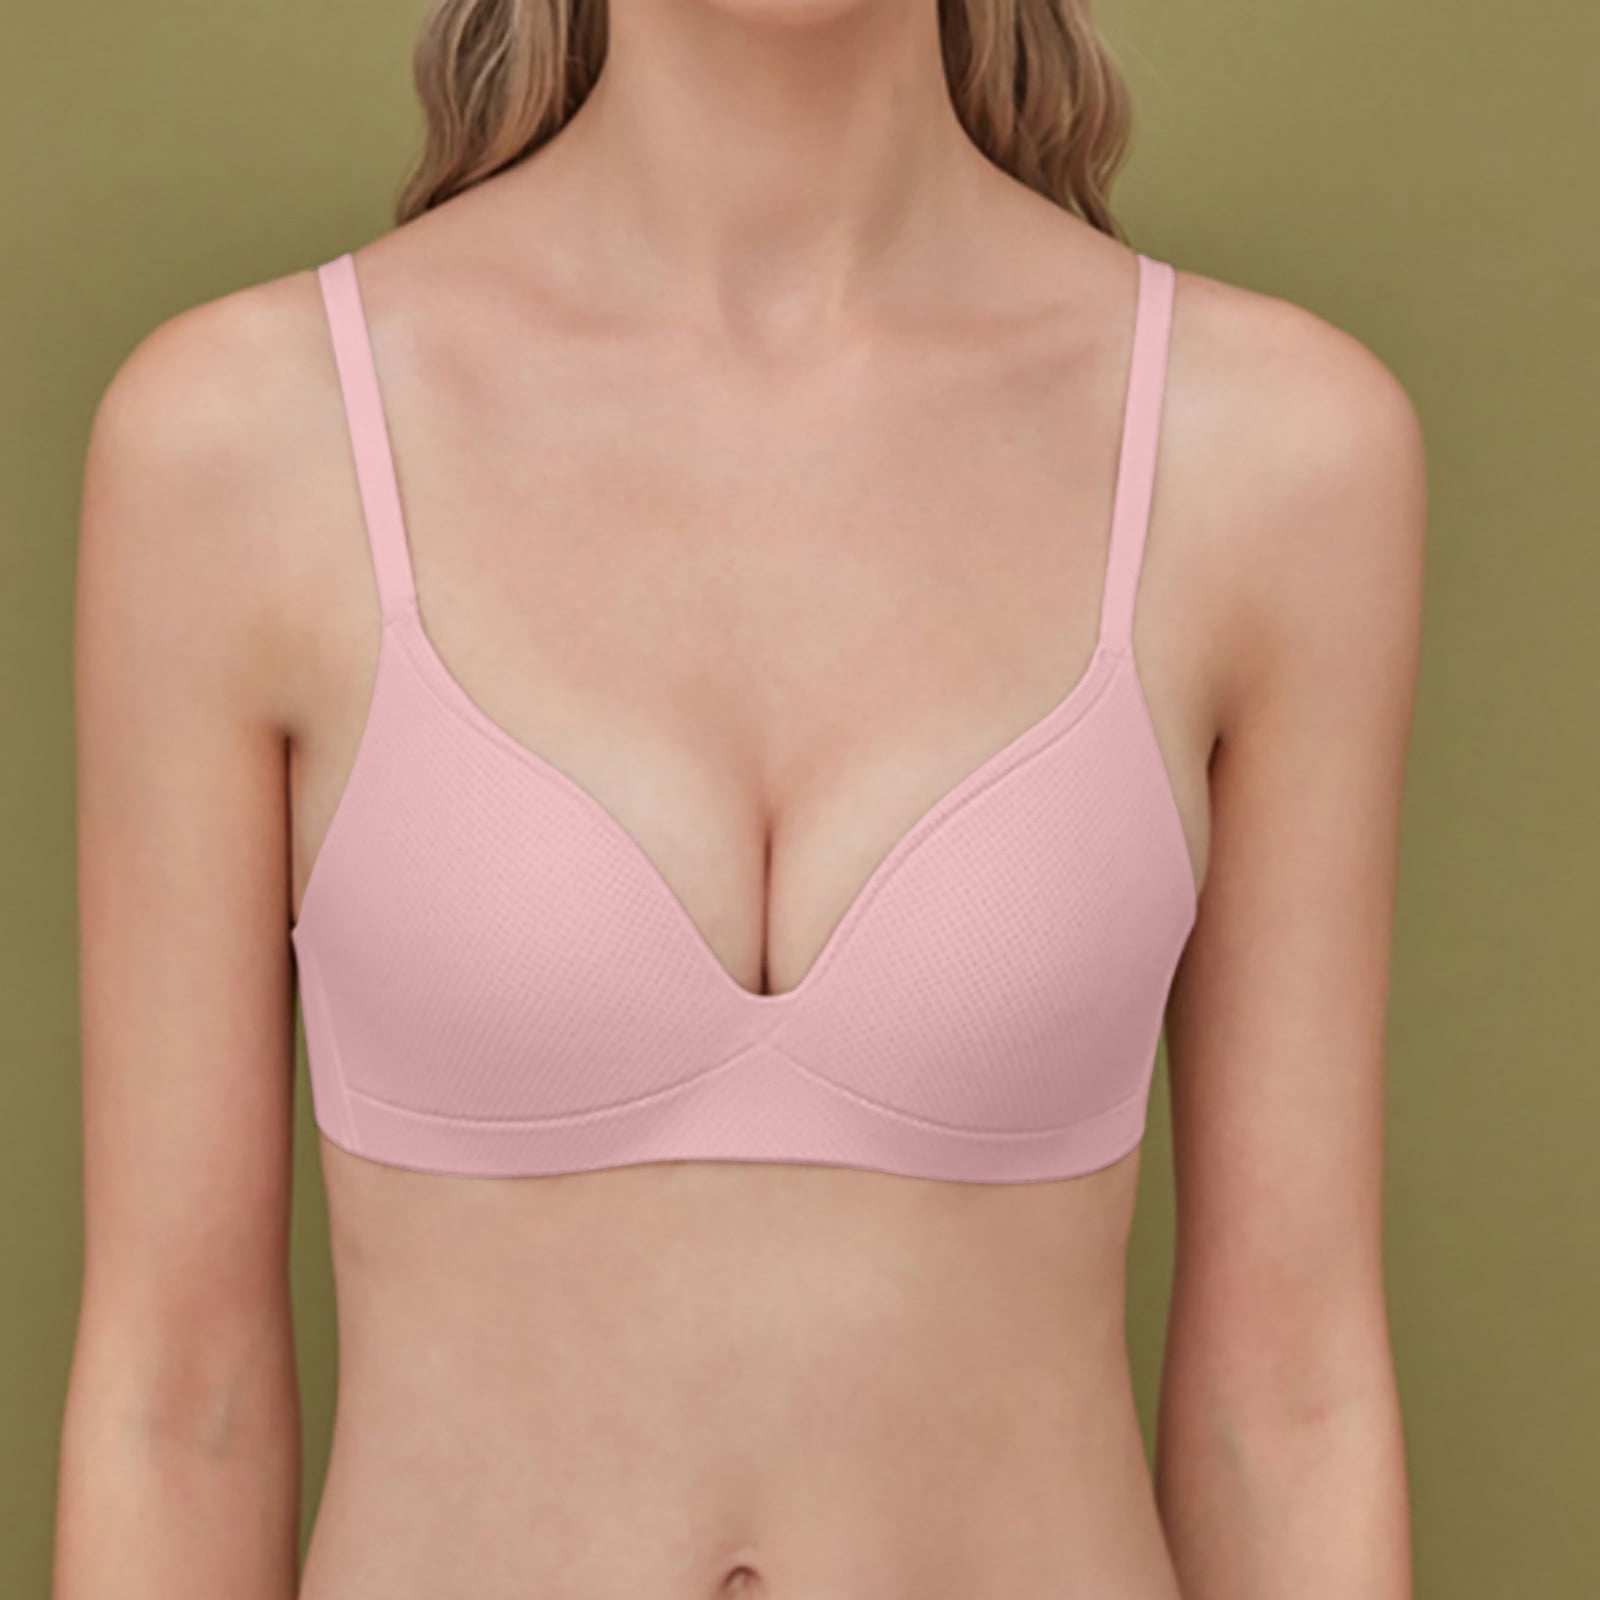 SBYOJLPB The Summer I Turned Pretty Lightweight Bra, Seamless, Small Chest,  No Steel Ring, Cup Underwear (Pink) 